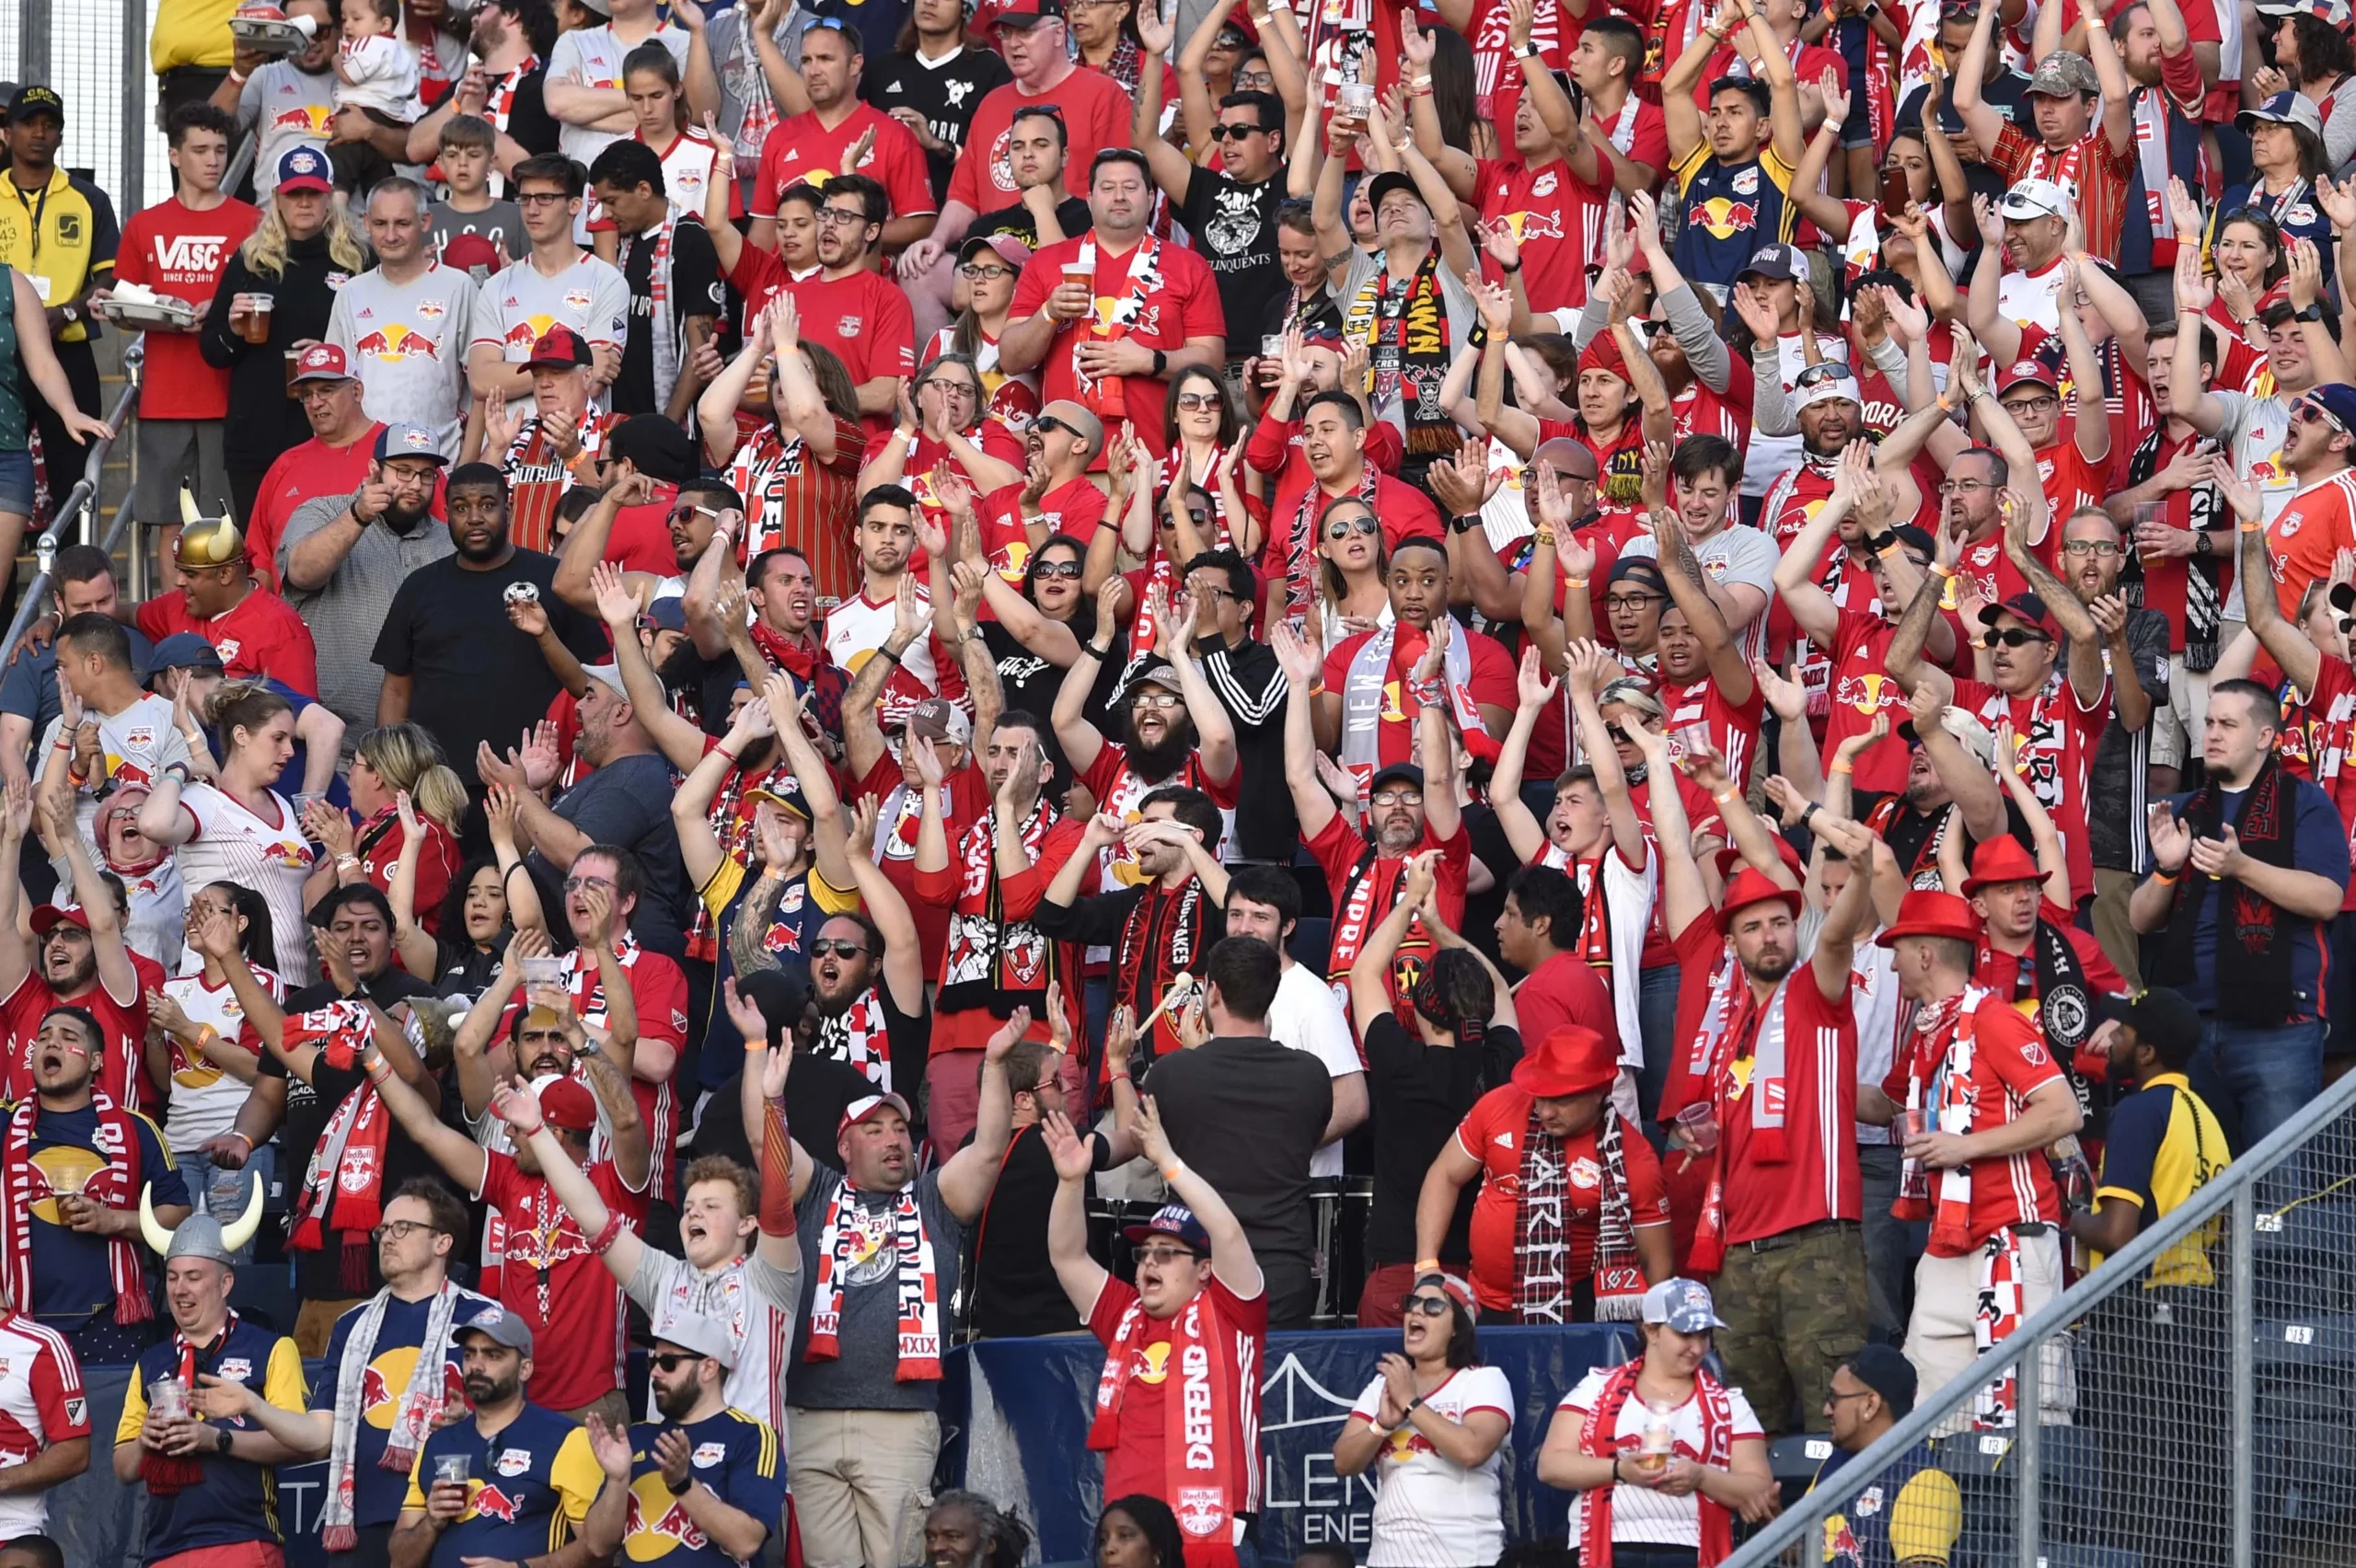 Soccer crowd wearing red jerseys and red knit scarves